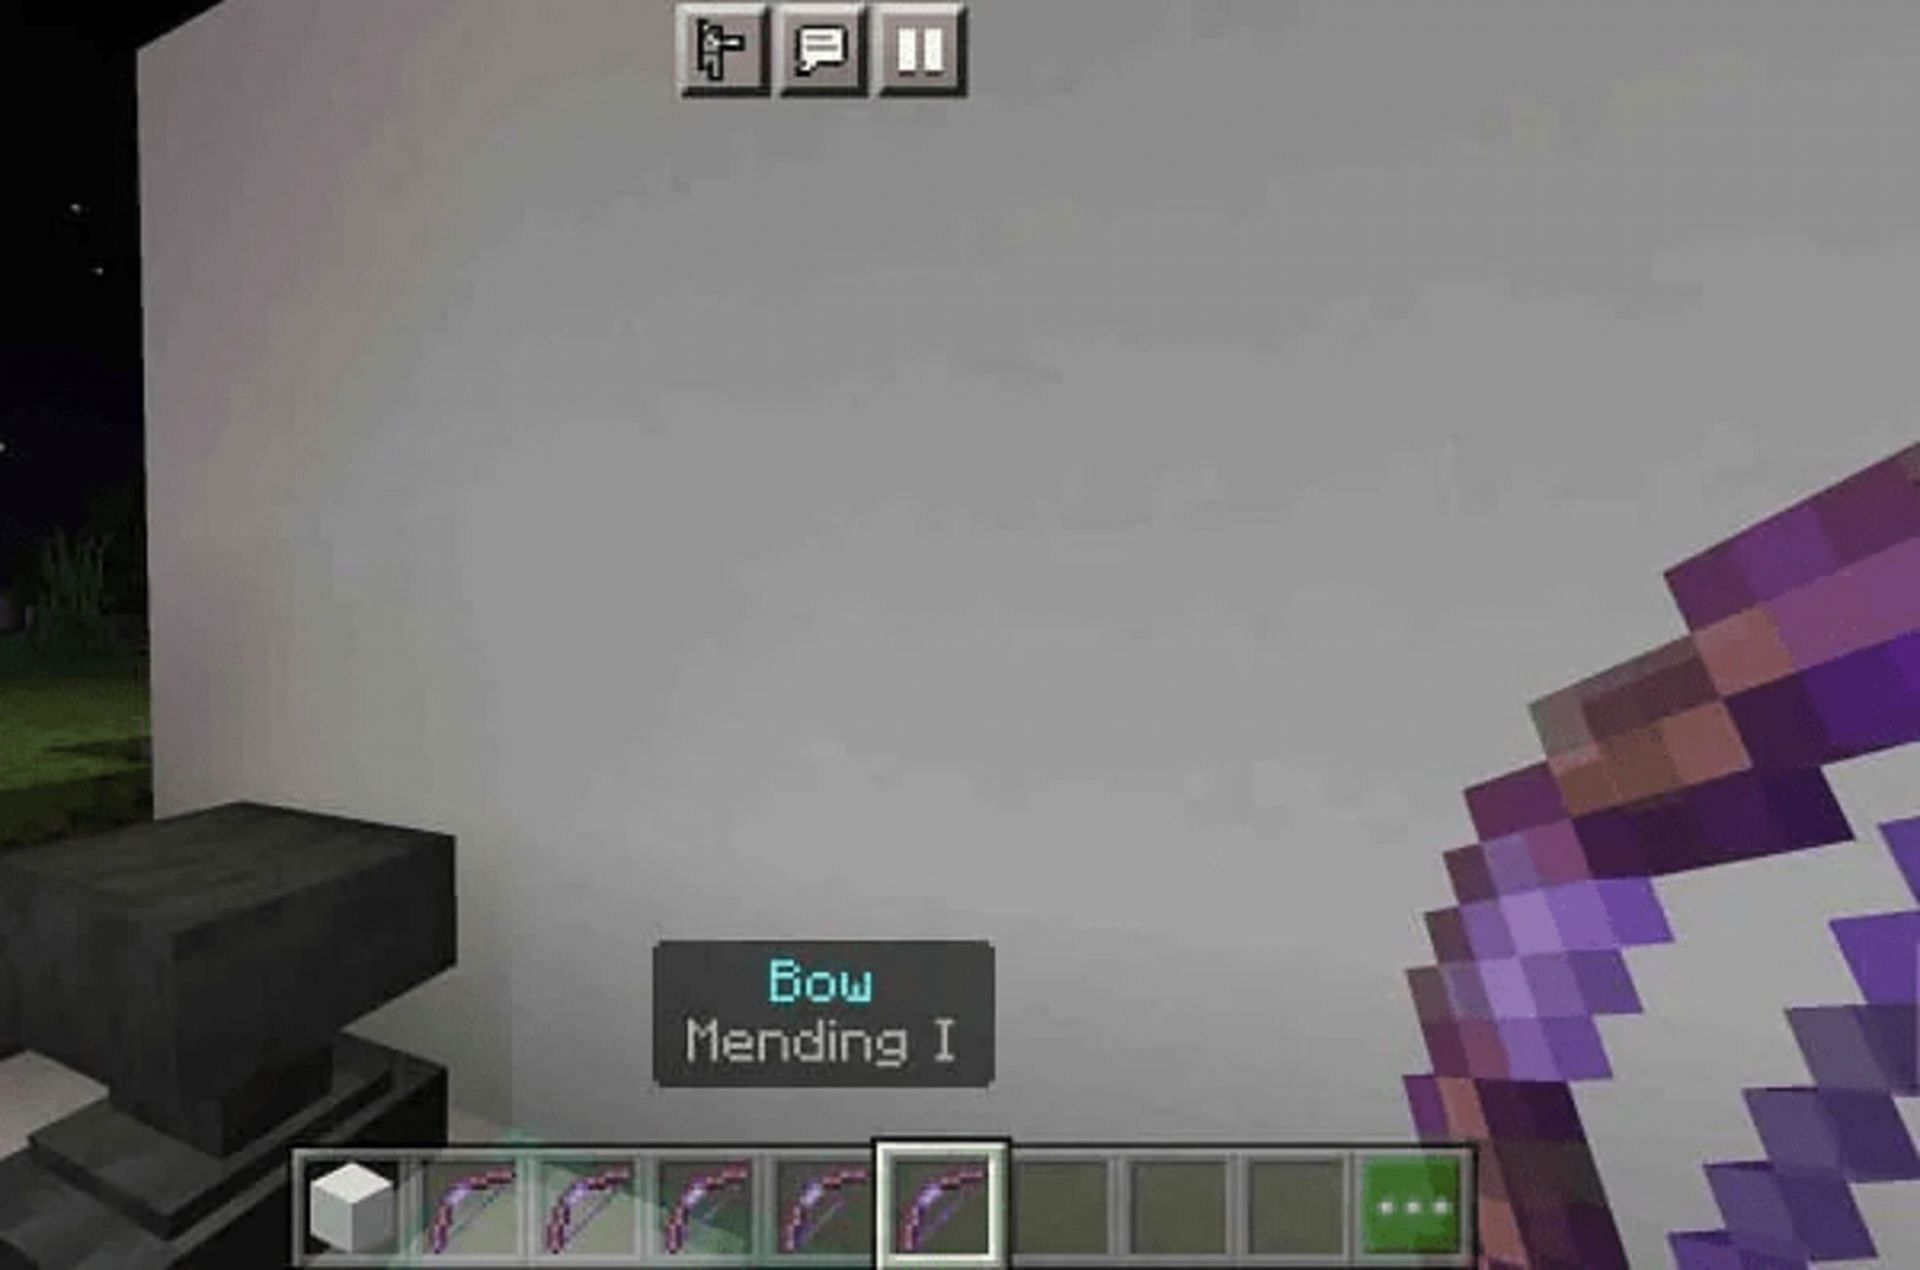 Mending can keep a player&#039;s bow in perfect condition as long as the XP orbs keep flowing (Image via Mojang)